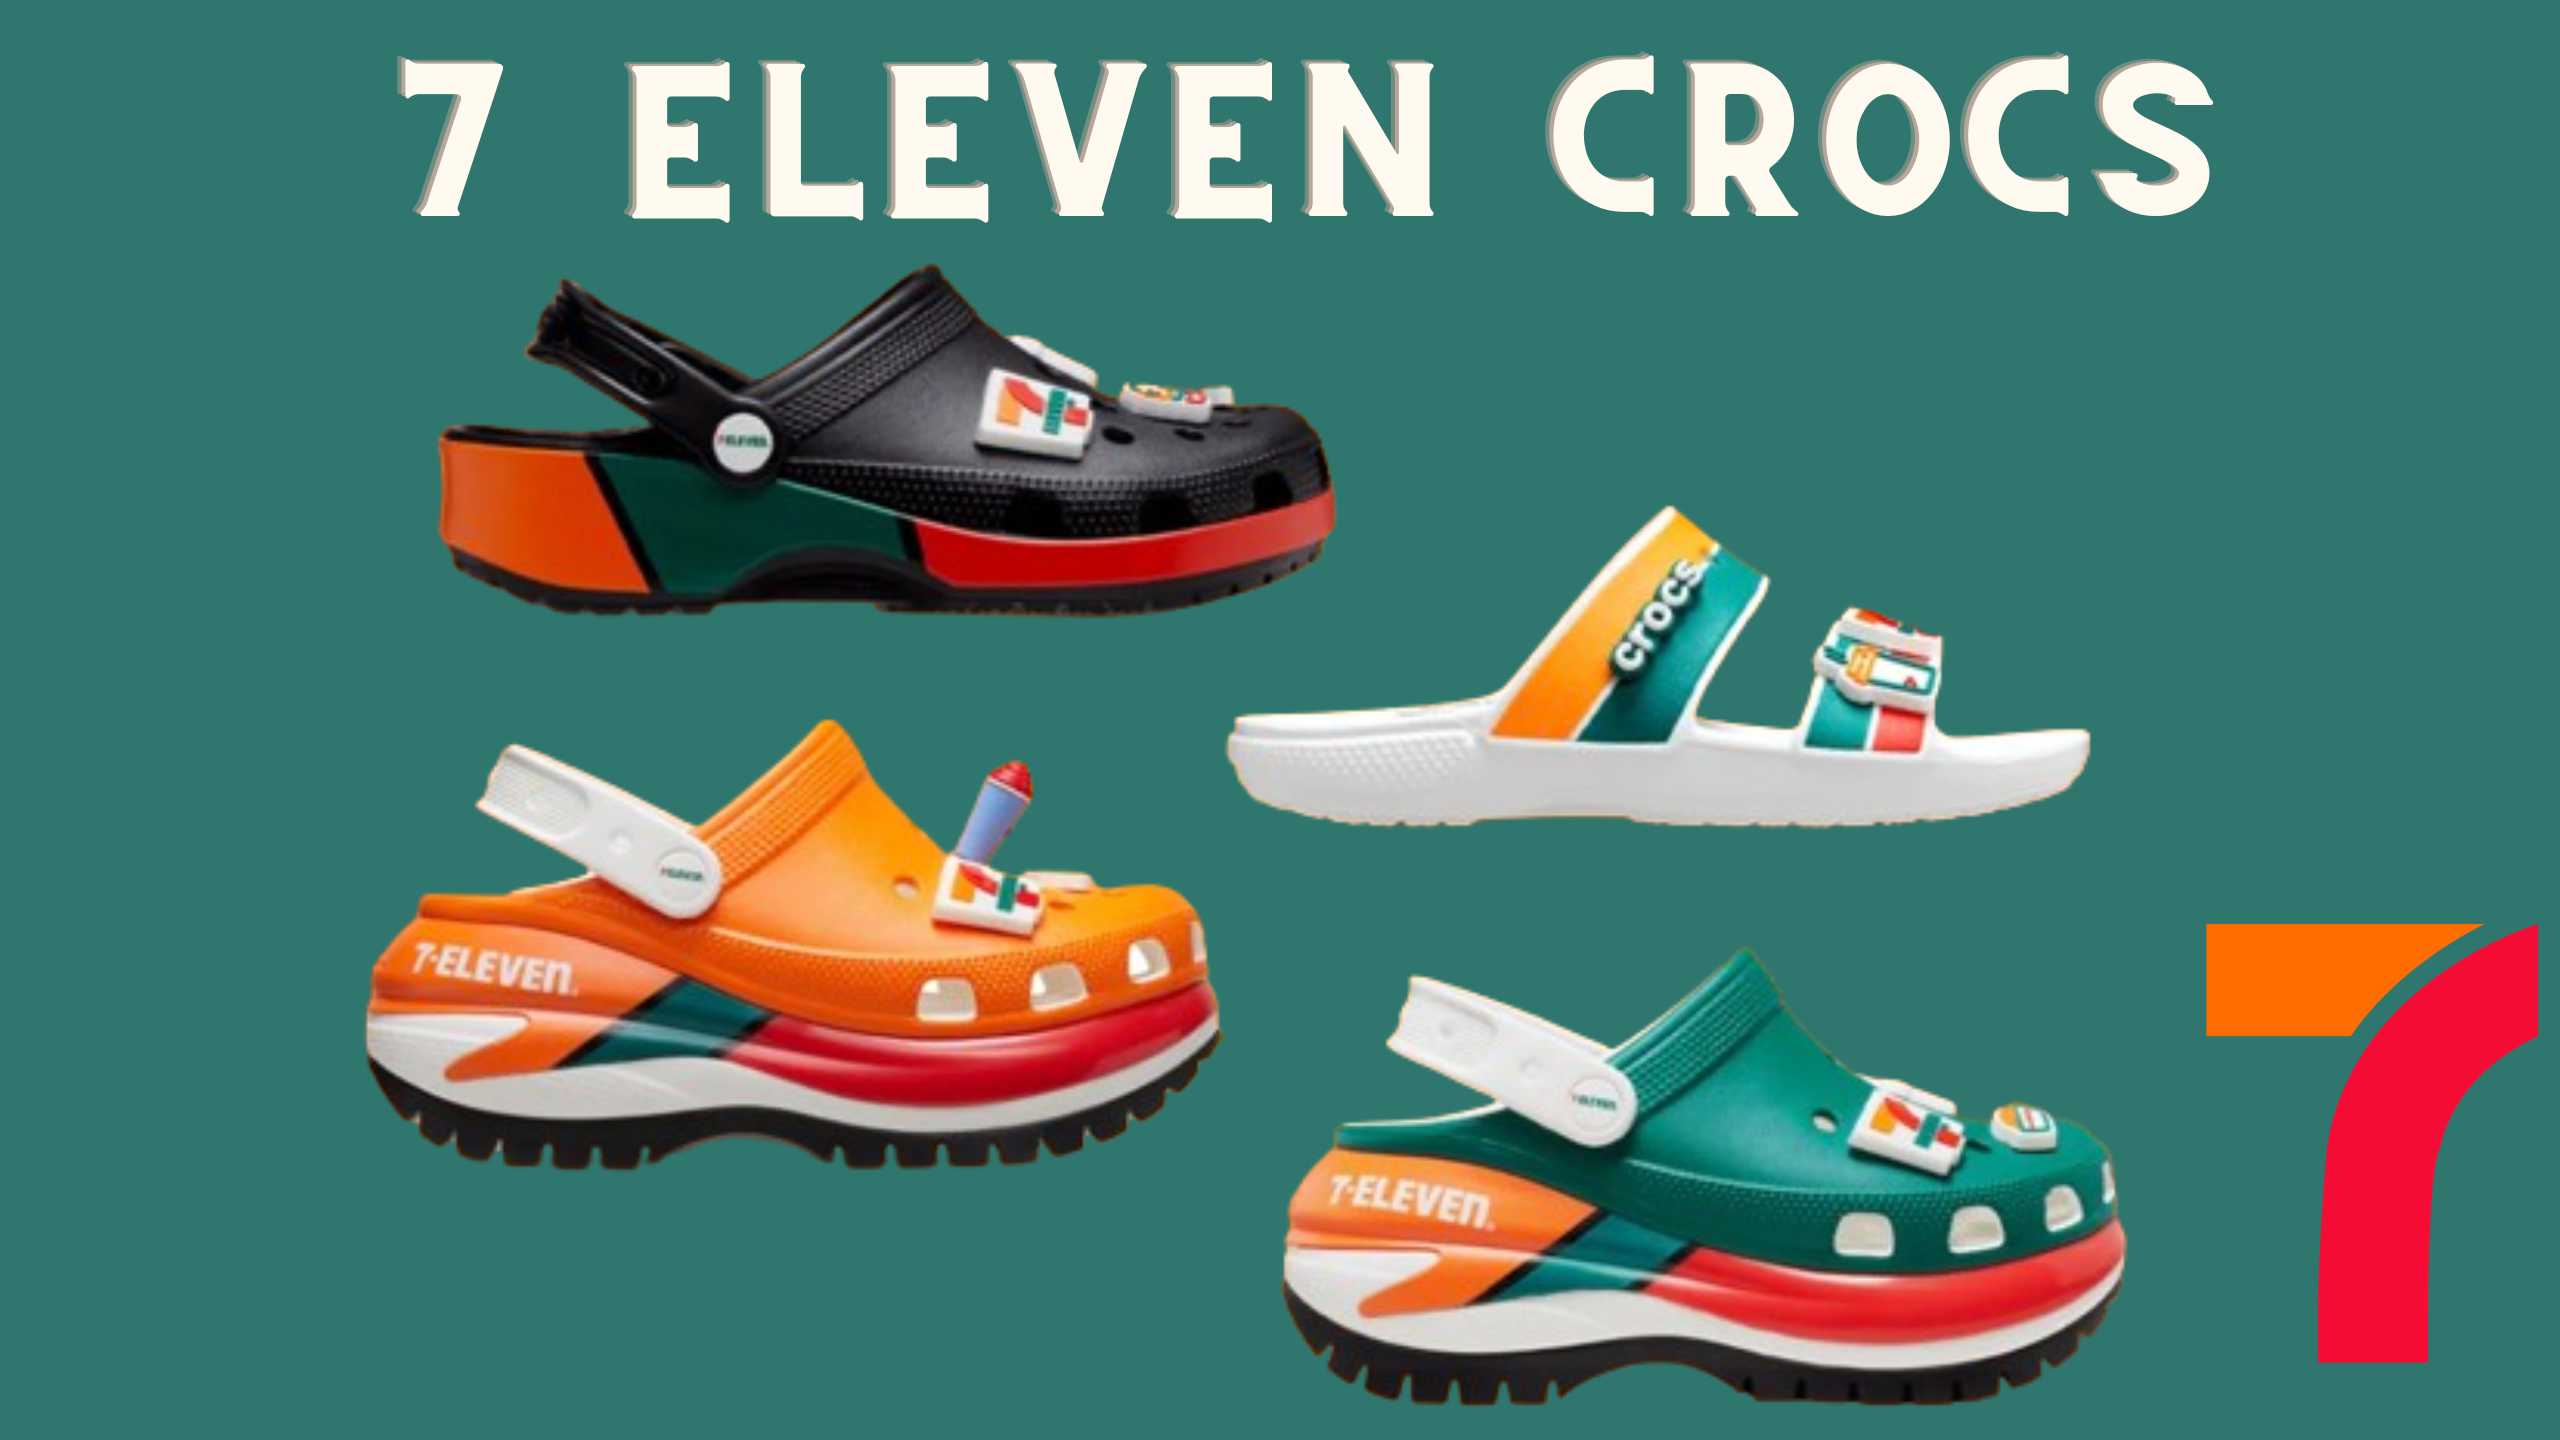 7 Eleven Crocs: How Do I Get and Price Review